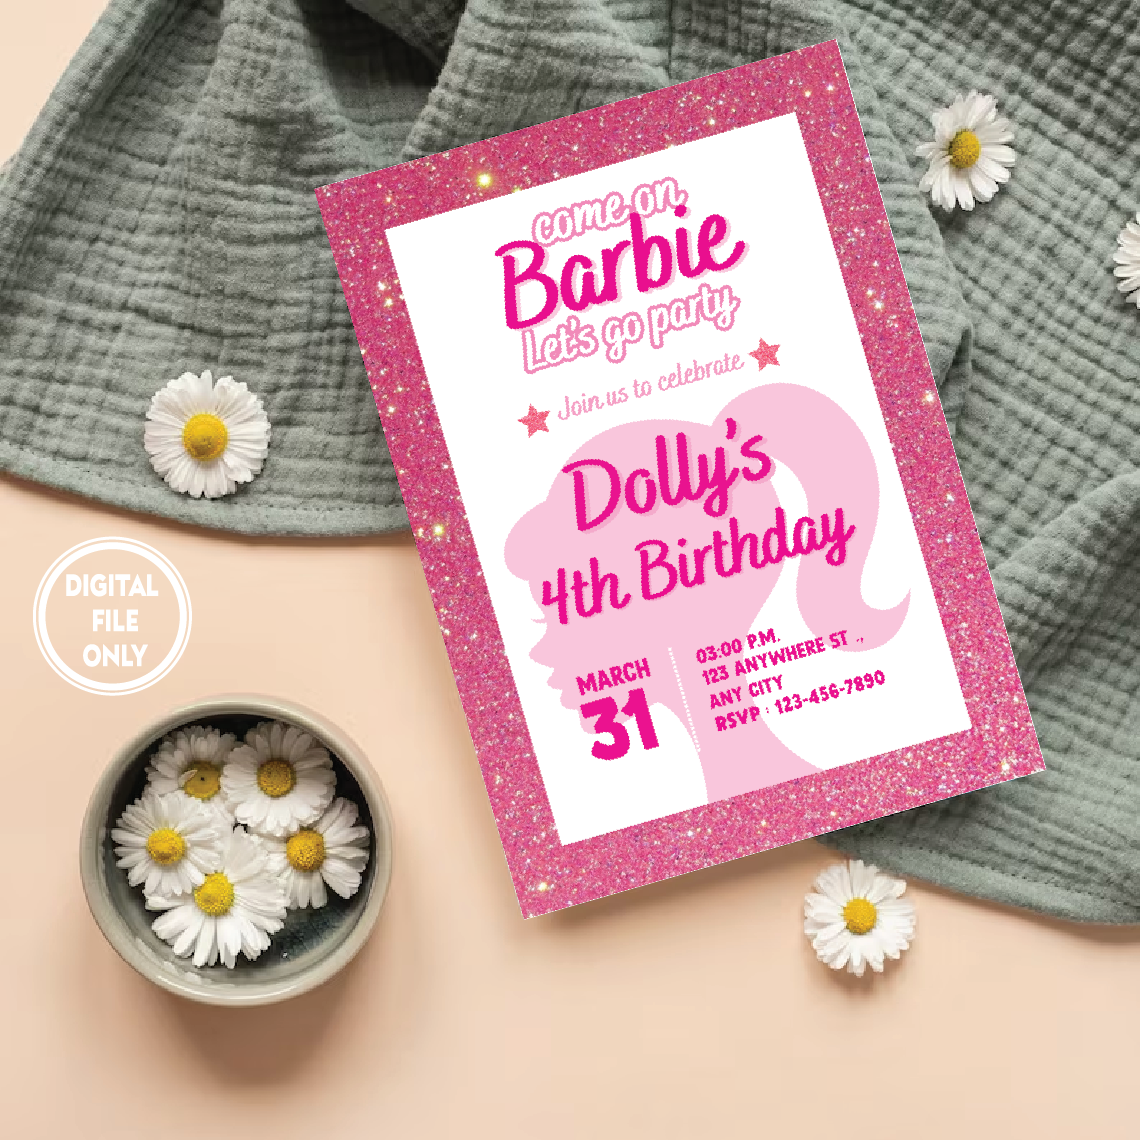 Personalized File Doll Party Invitation, Doll Birthday Party, Pink Birthday Party Invitation, Pink Doll Birthday Invitation, Doll Invitation, Instant Download PNG File Only